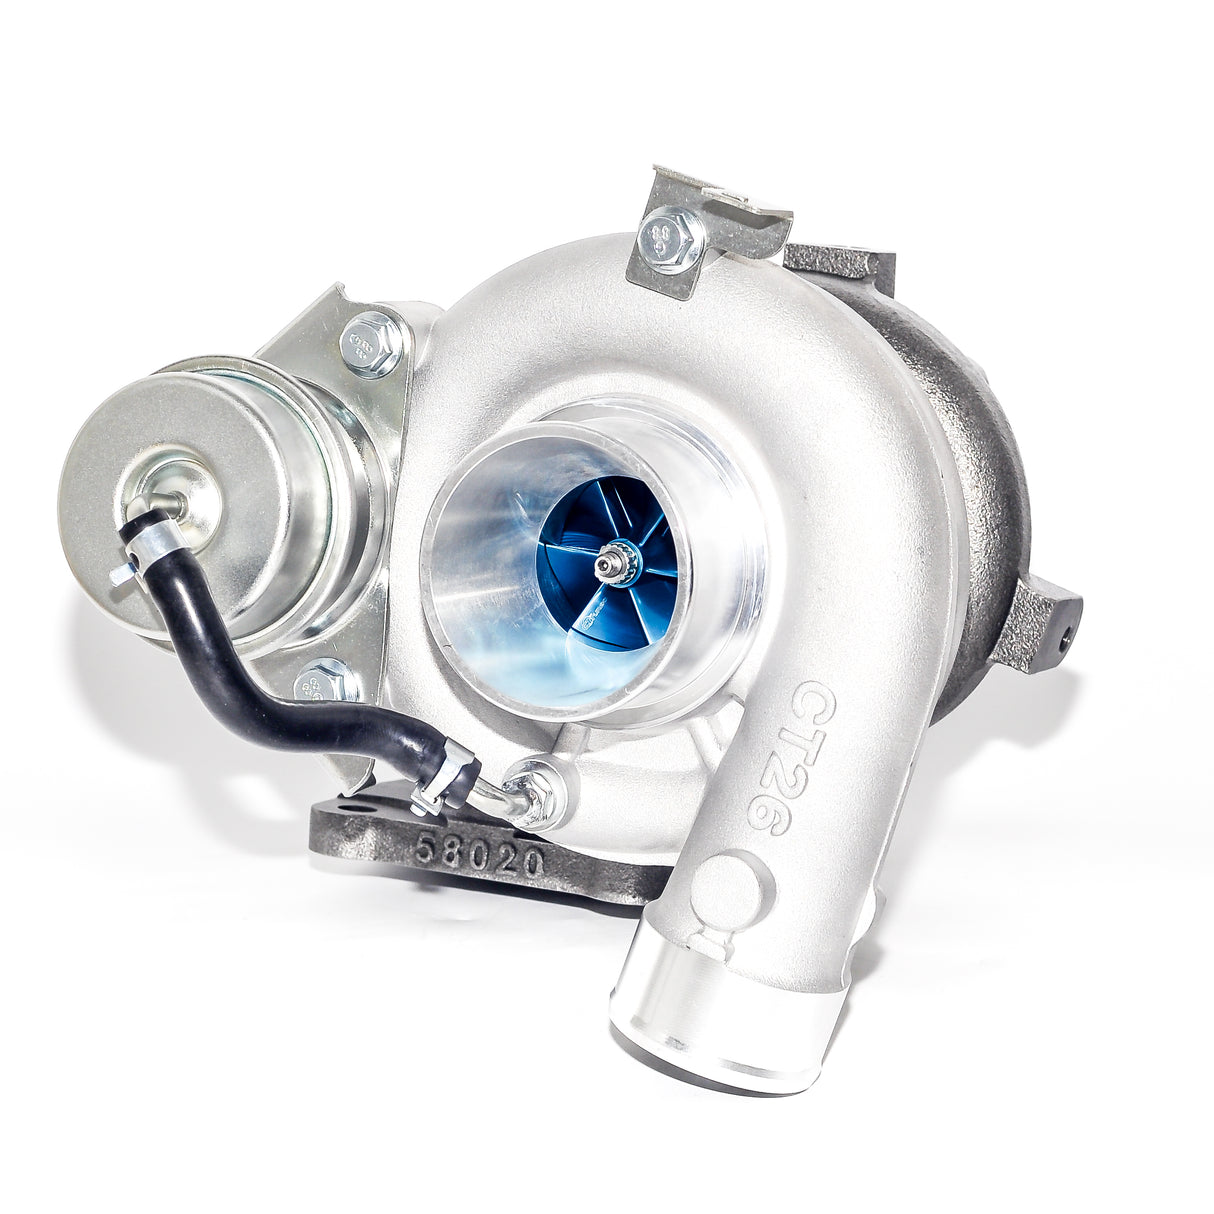 CCT Stage One Billet Turbo charger To Suit Toyota Landcruiser 80 Series 1HD-T HDJ80 17010